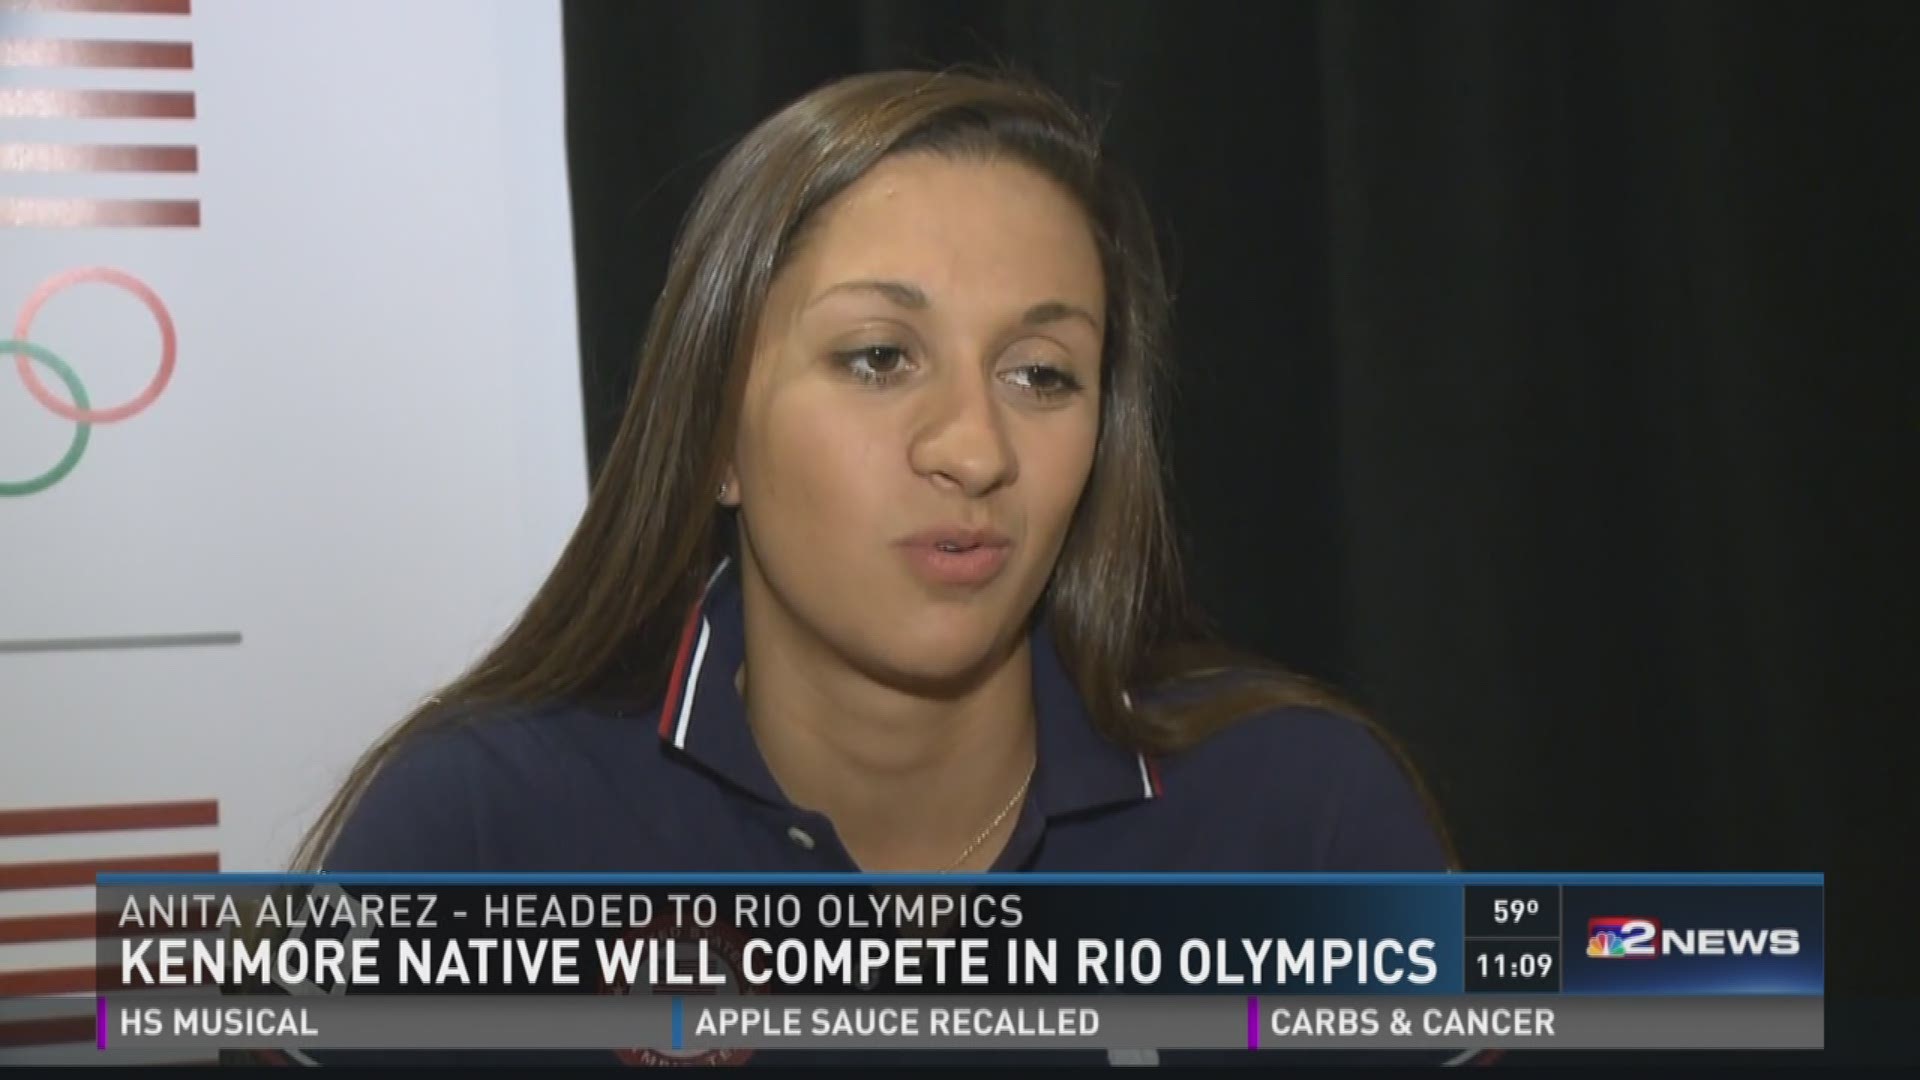 KENMORE NATIVE WILL COMPETE IN RIO OLYMPICS